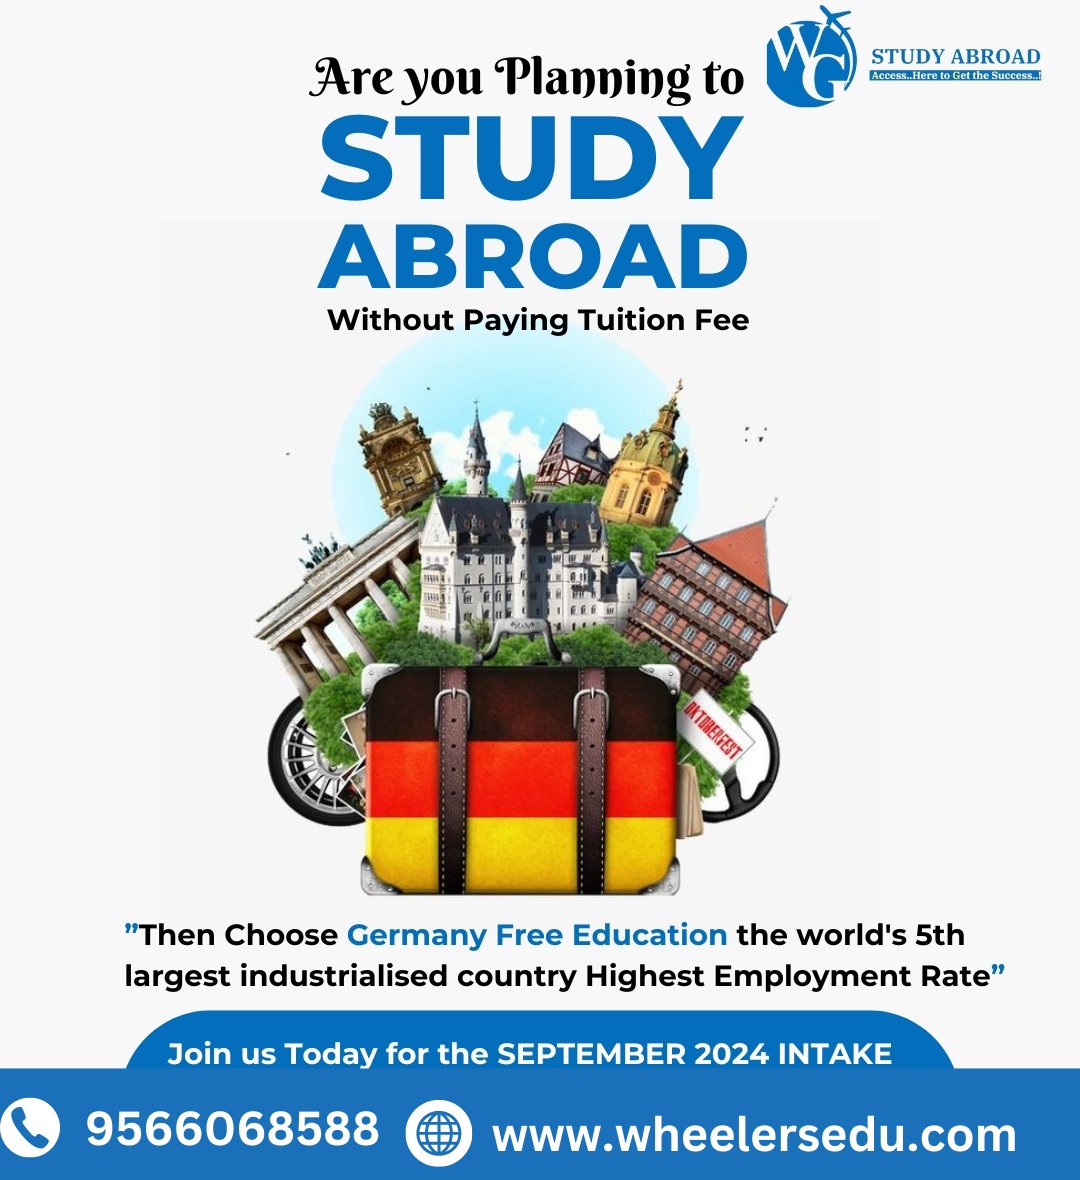 Dreaming of studying abroad without worrying about tuition fees? Look no further! Germany offers free education and boasts the lowest employment rate. Join us today for the September 2024 intake #FreeEducation #GermanyStudyAbroad #GlobalOpportunitie 
Phone: 9655068588